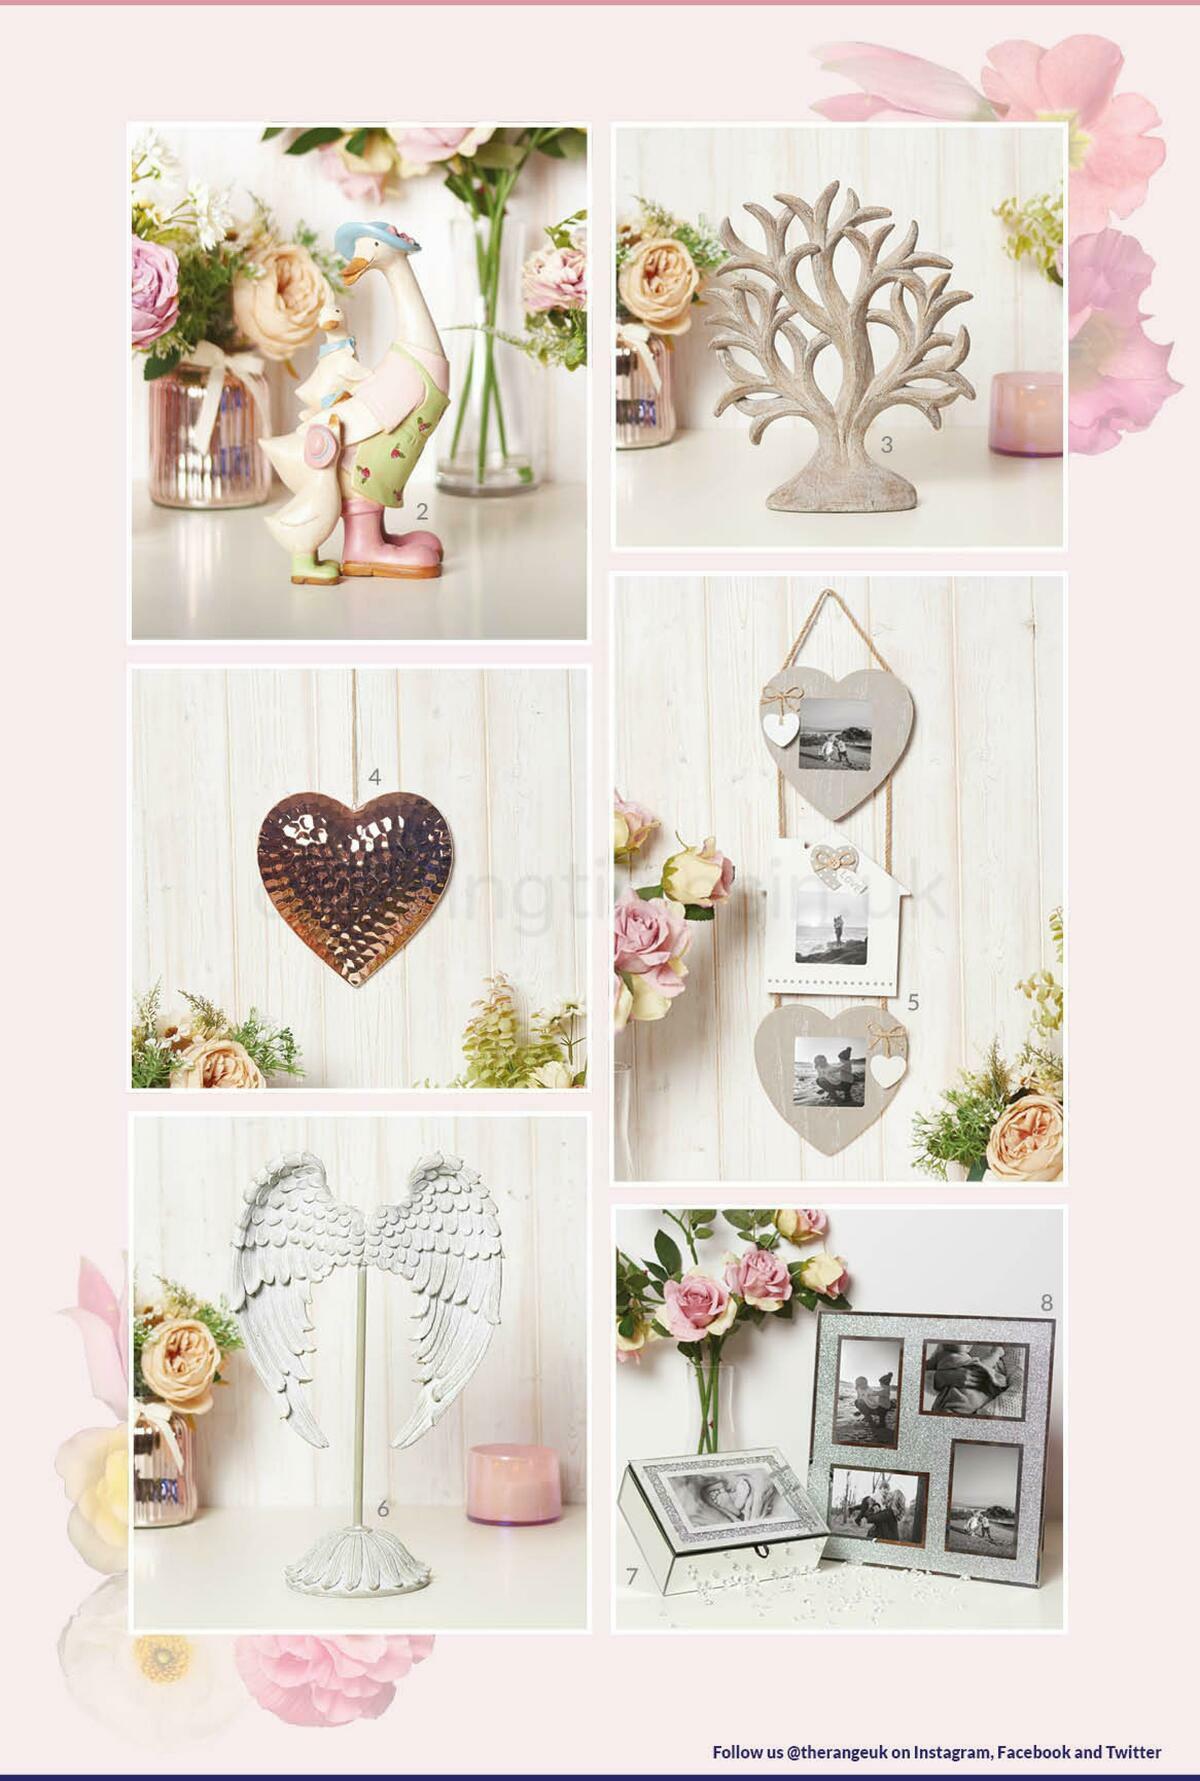 The Range Mother's Day Offers from 25 February